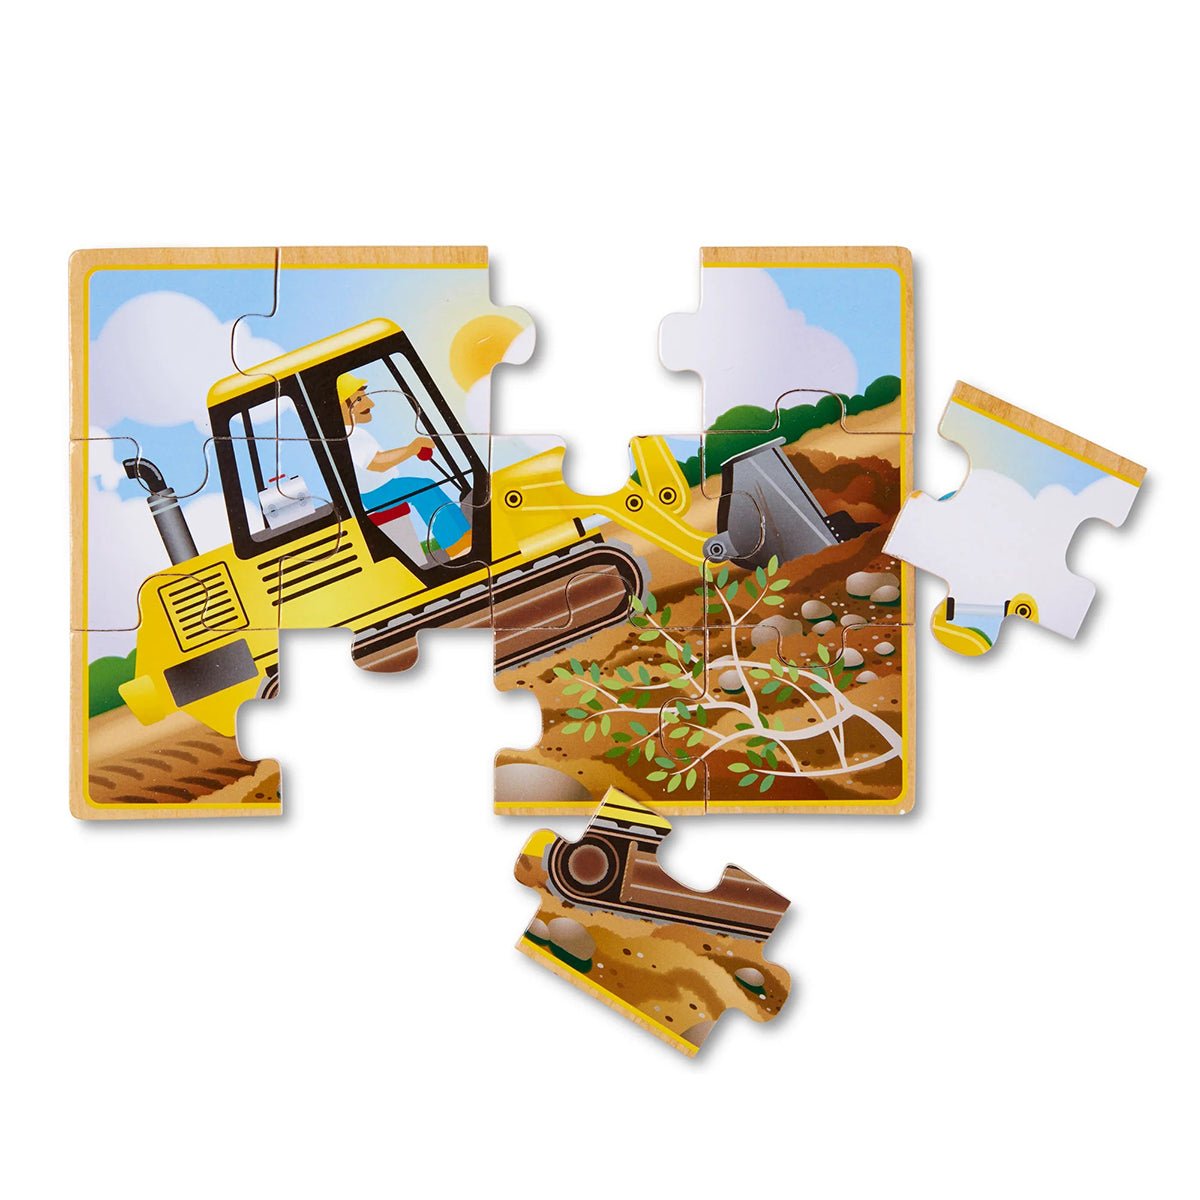 4 Construction Jigsaw puzzles in a box | Melissa and Doug